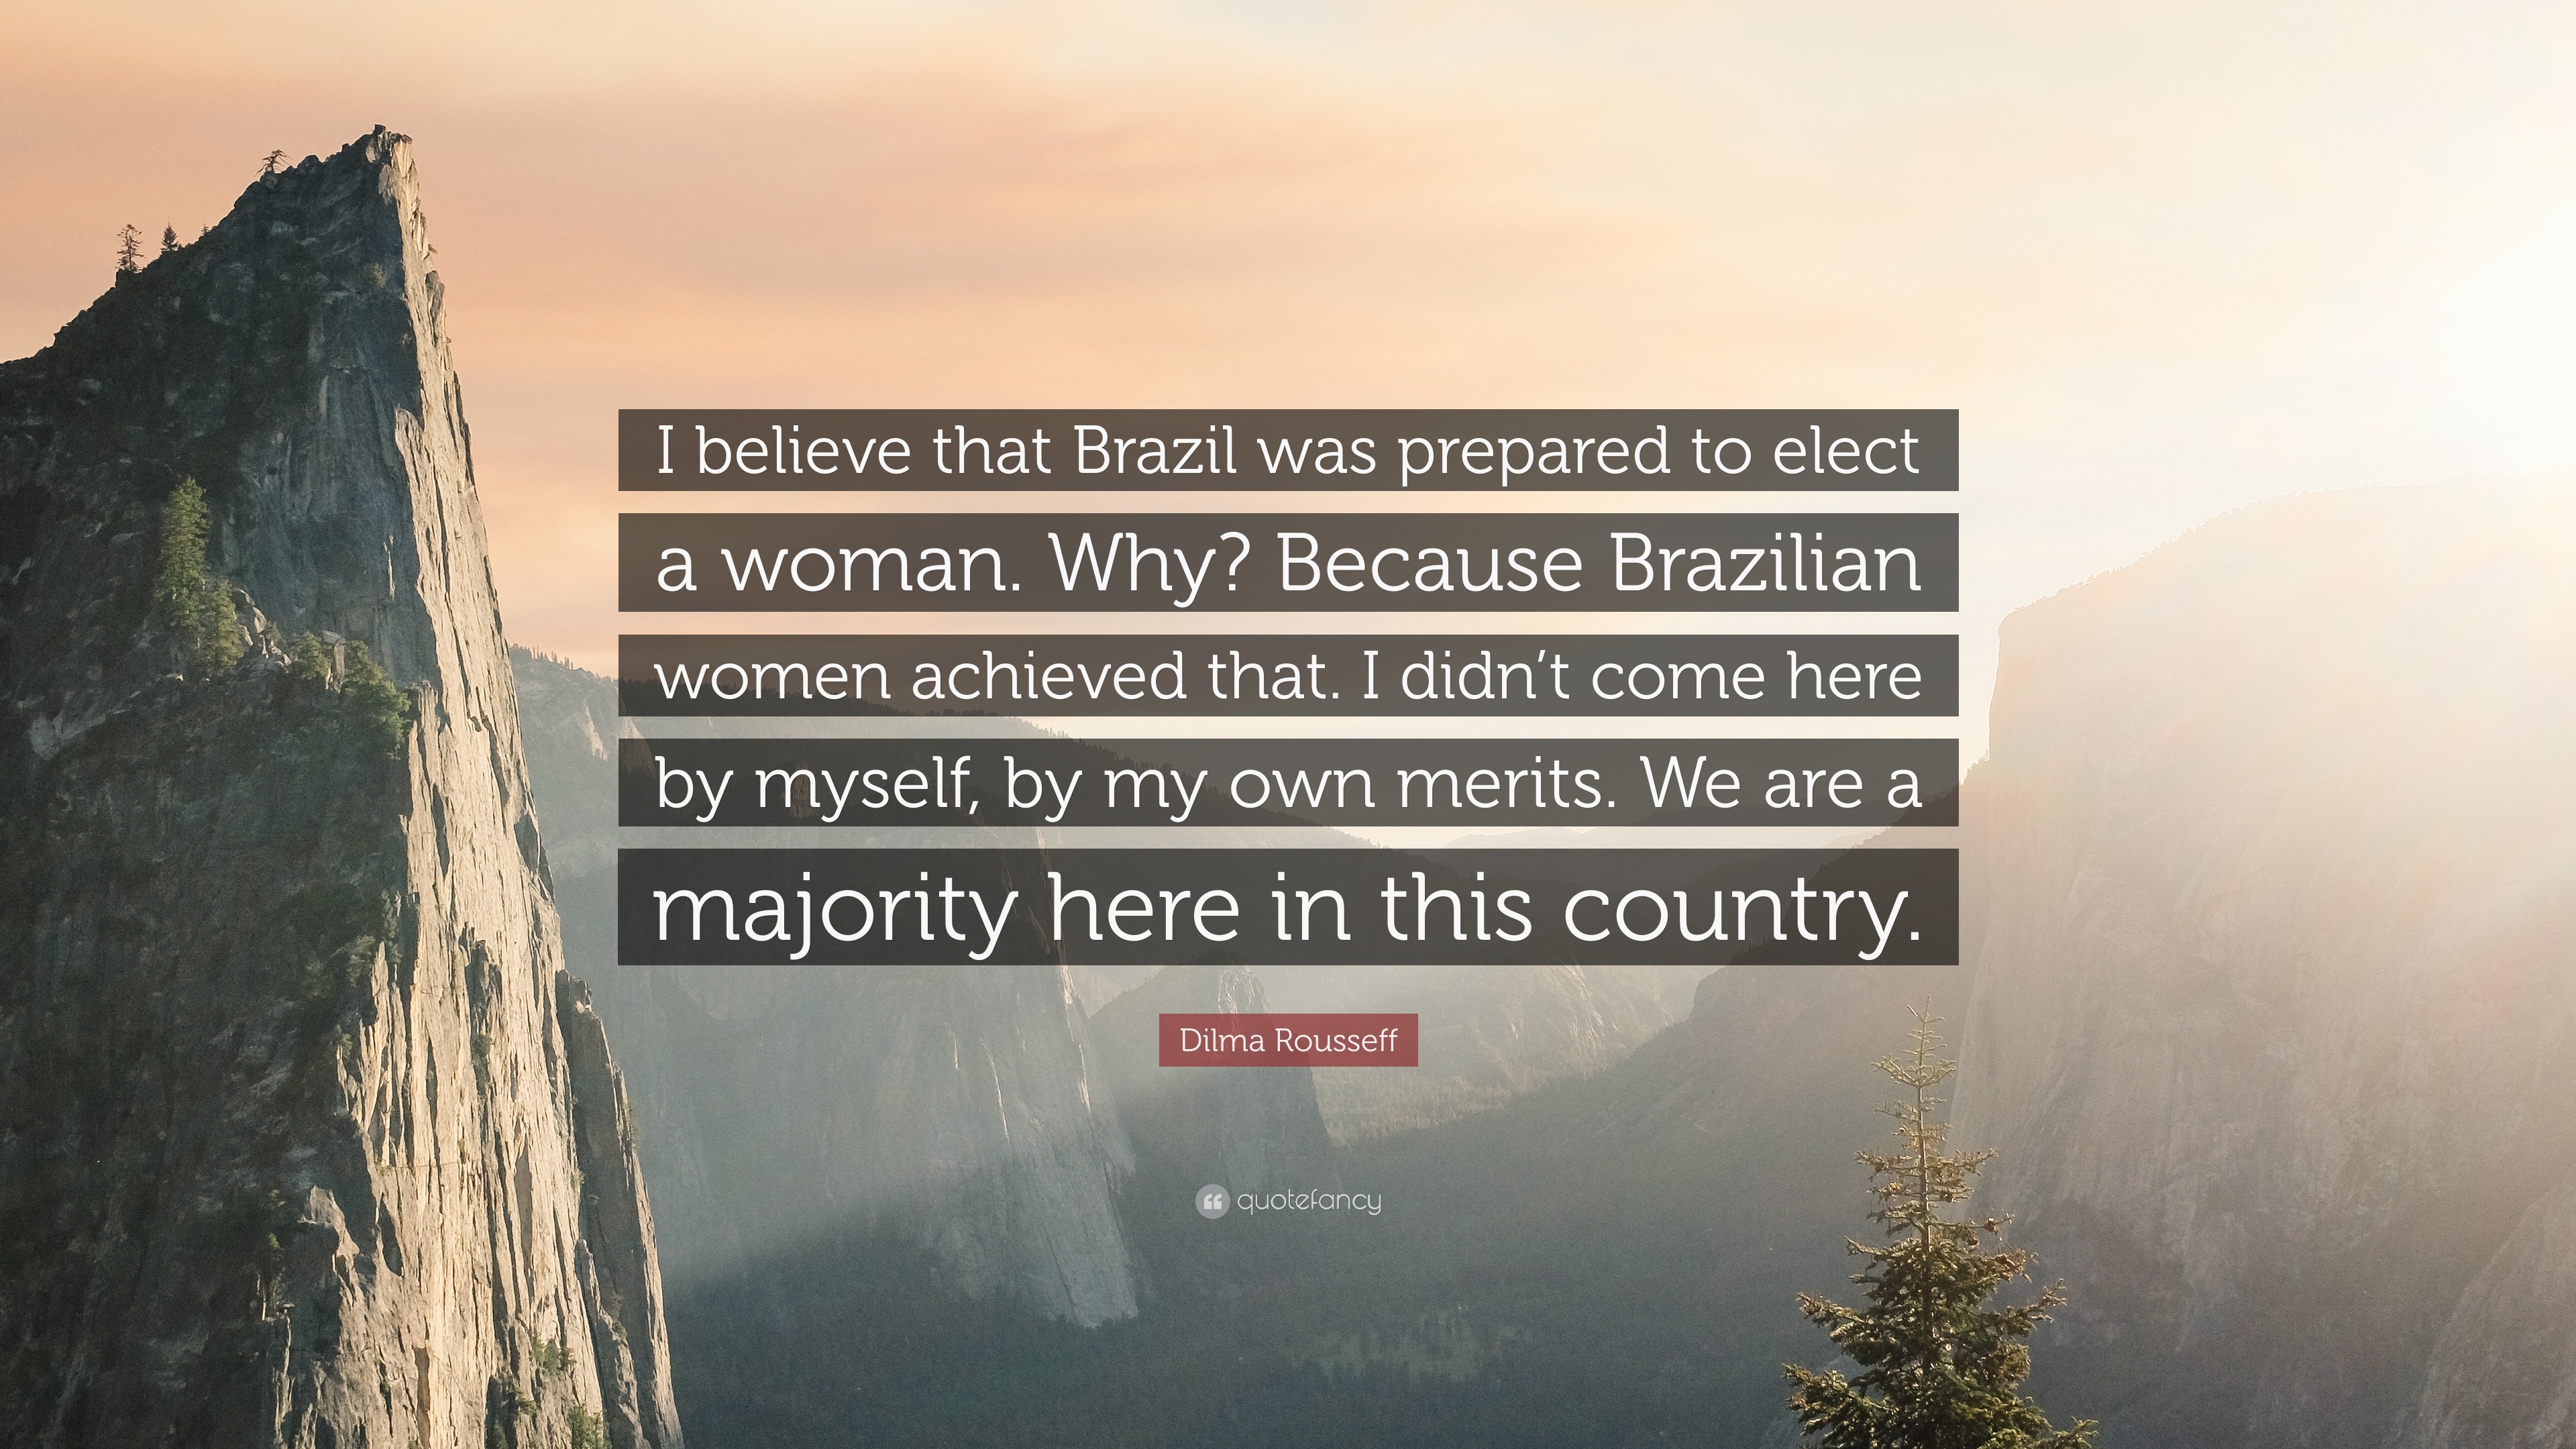 Dilma Rousseff's pledge to empower Brazil's women comes good